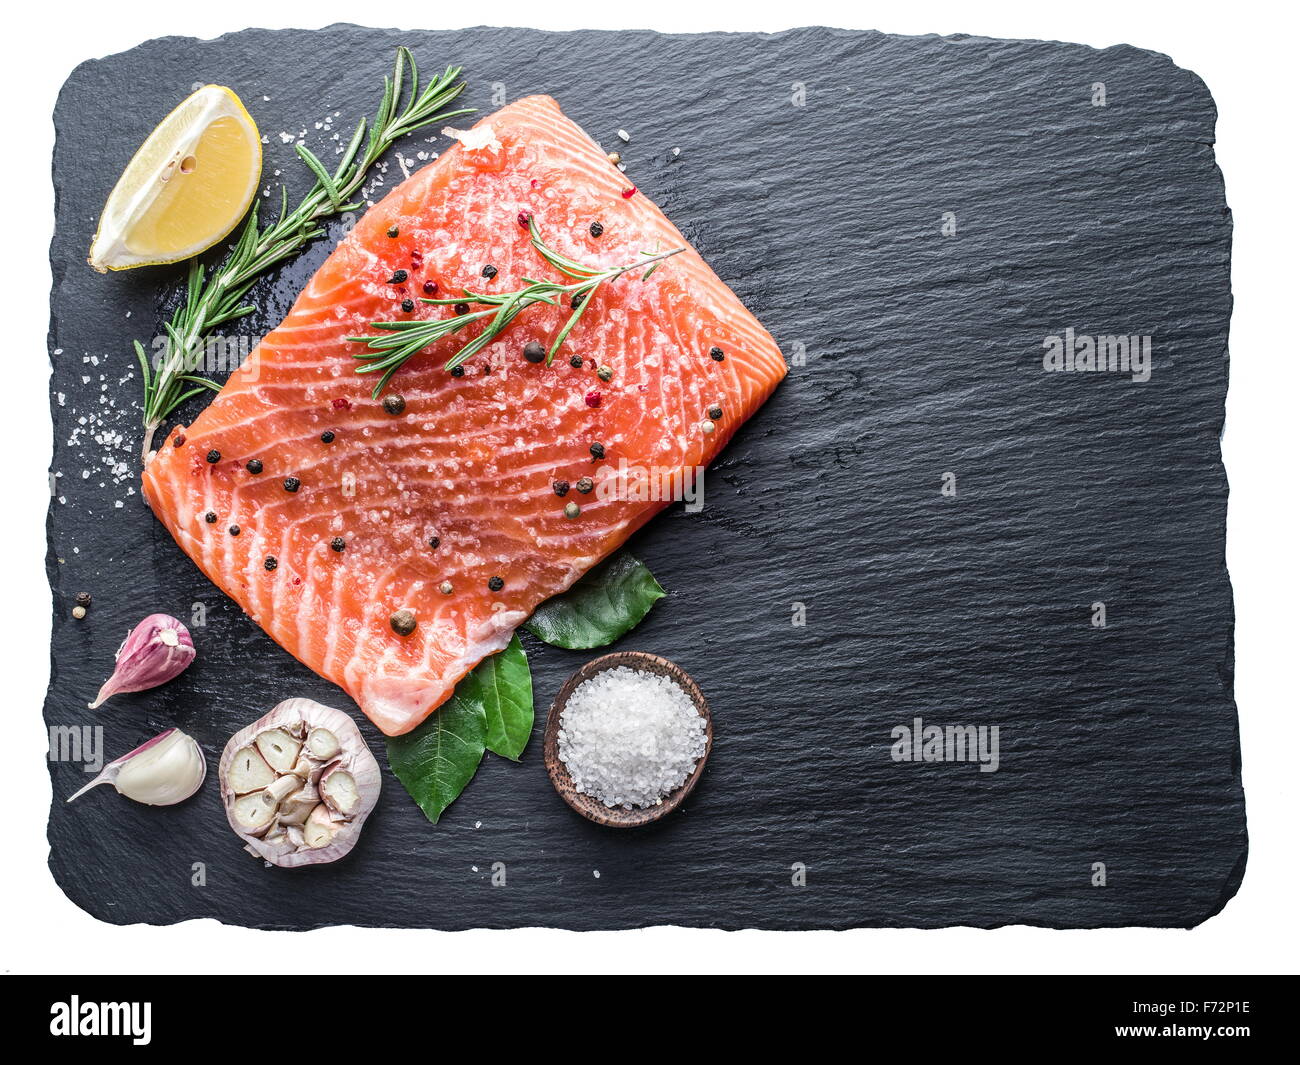 Fresh salmon on the black cutting board. File contains clipping paths. Stock Photo